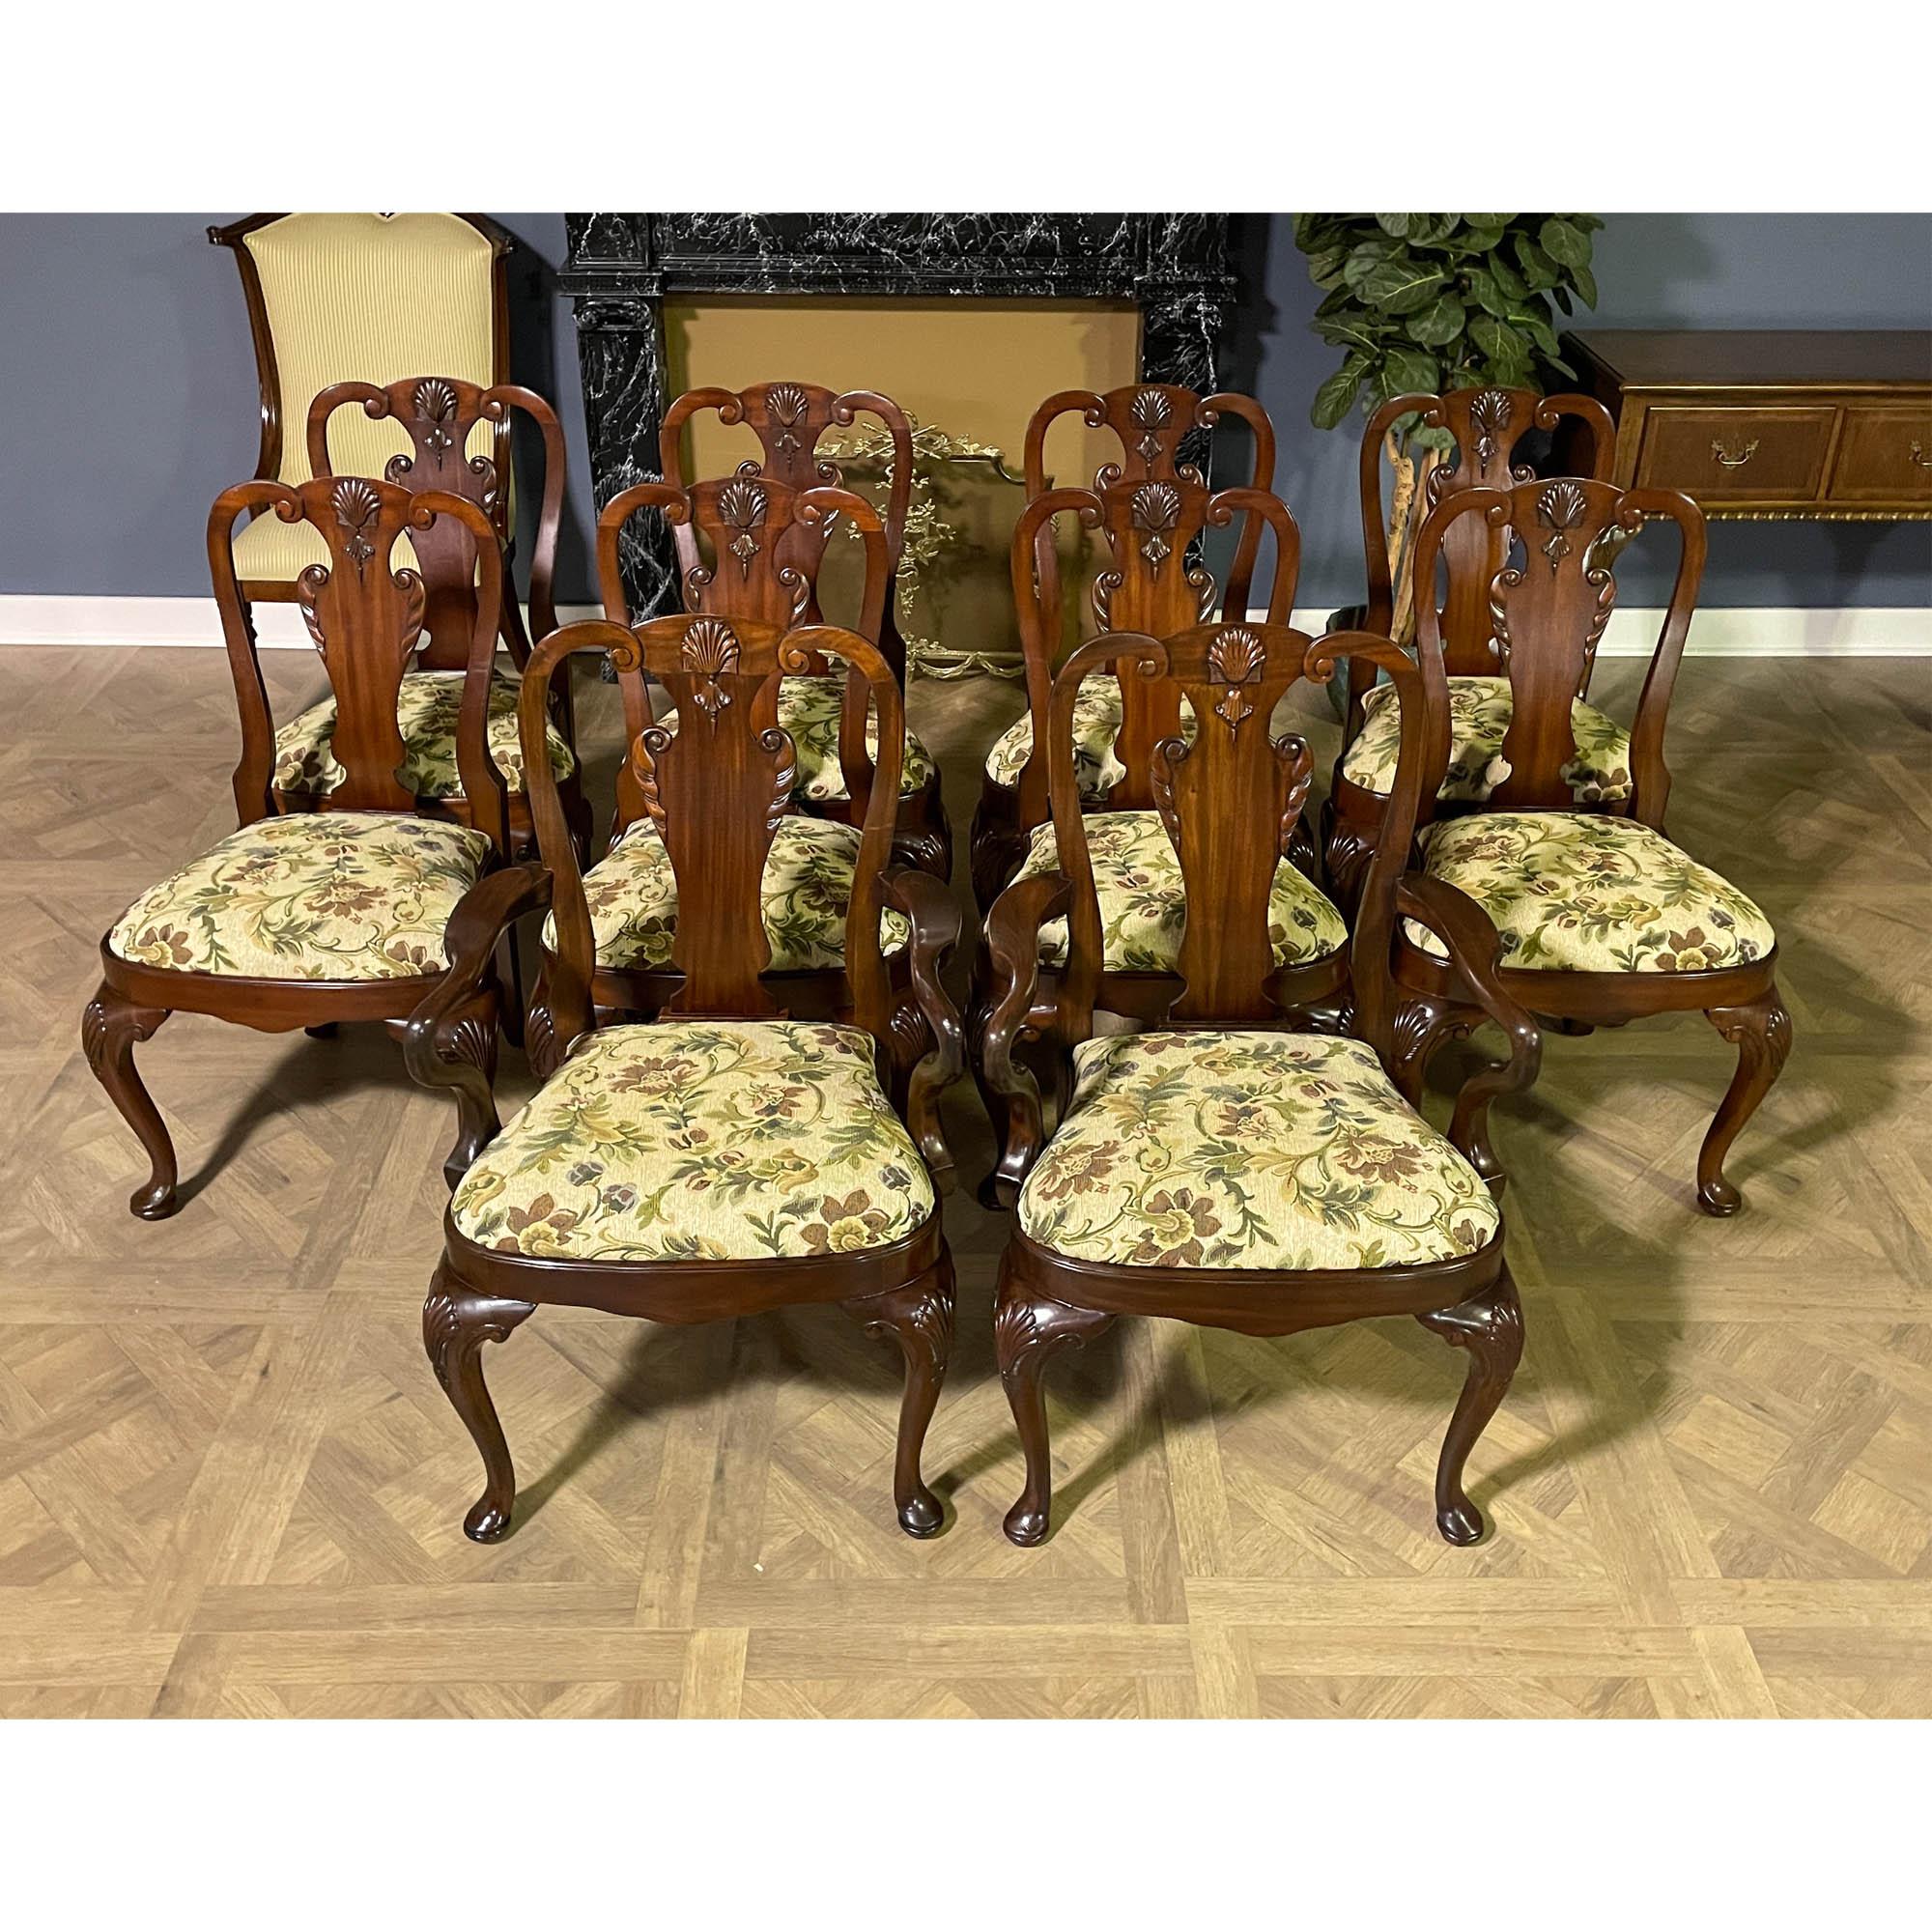 A Set of 10 Vintage Maitland Smith Dining Chairs consisting of 2 arm chairs and 8 side chairs. The arm chairs are large and comfortable and feature beautifully sculpted arms and this gives them a great quality designer look as well as a maximum